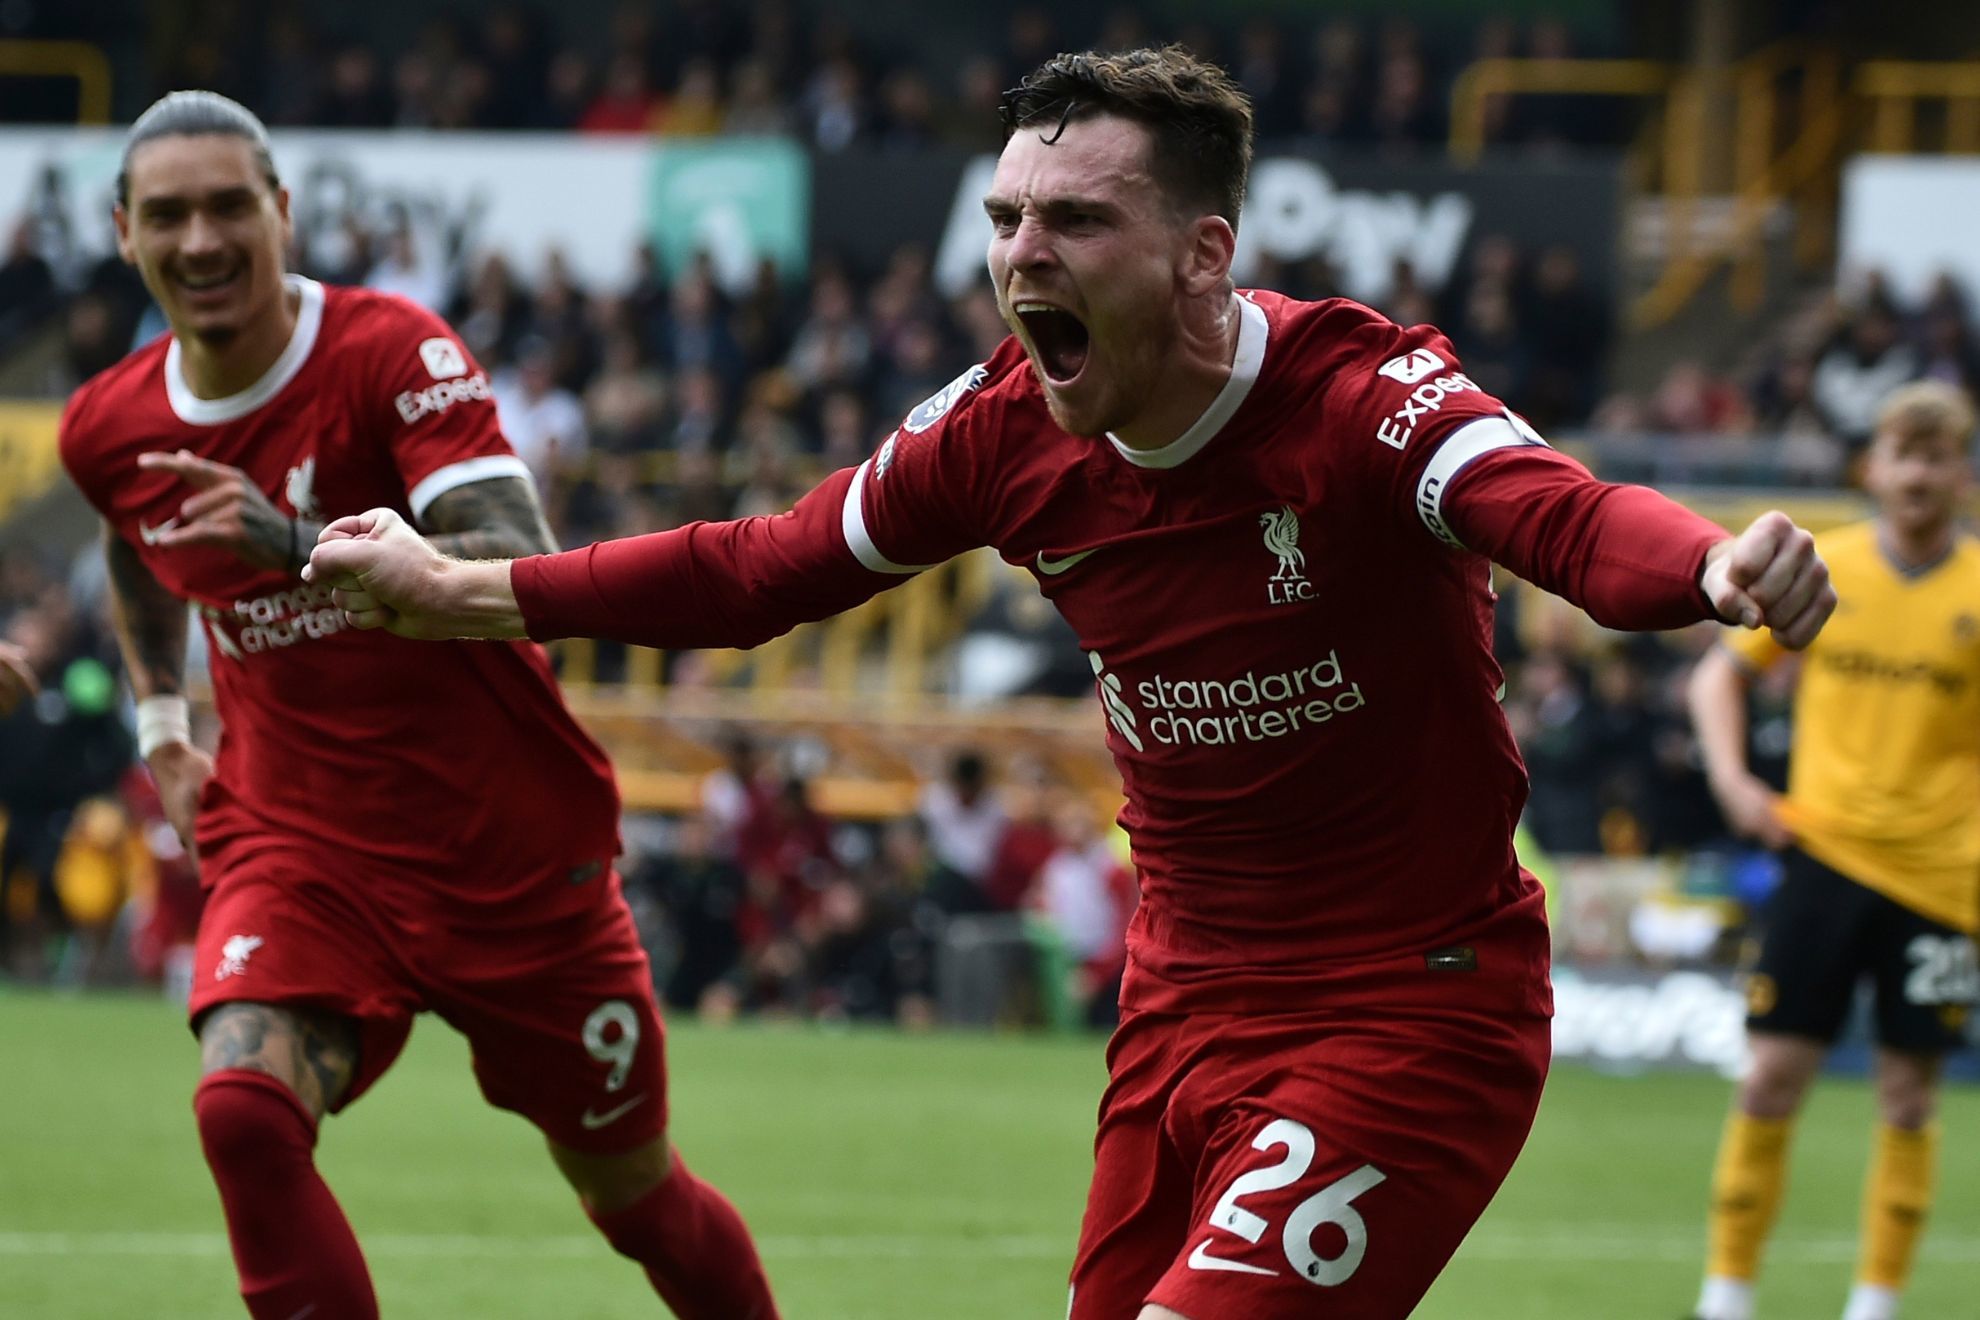 Liverpools Andrew Robertson celebrates after scoring his sides second goal against Wolverhampton